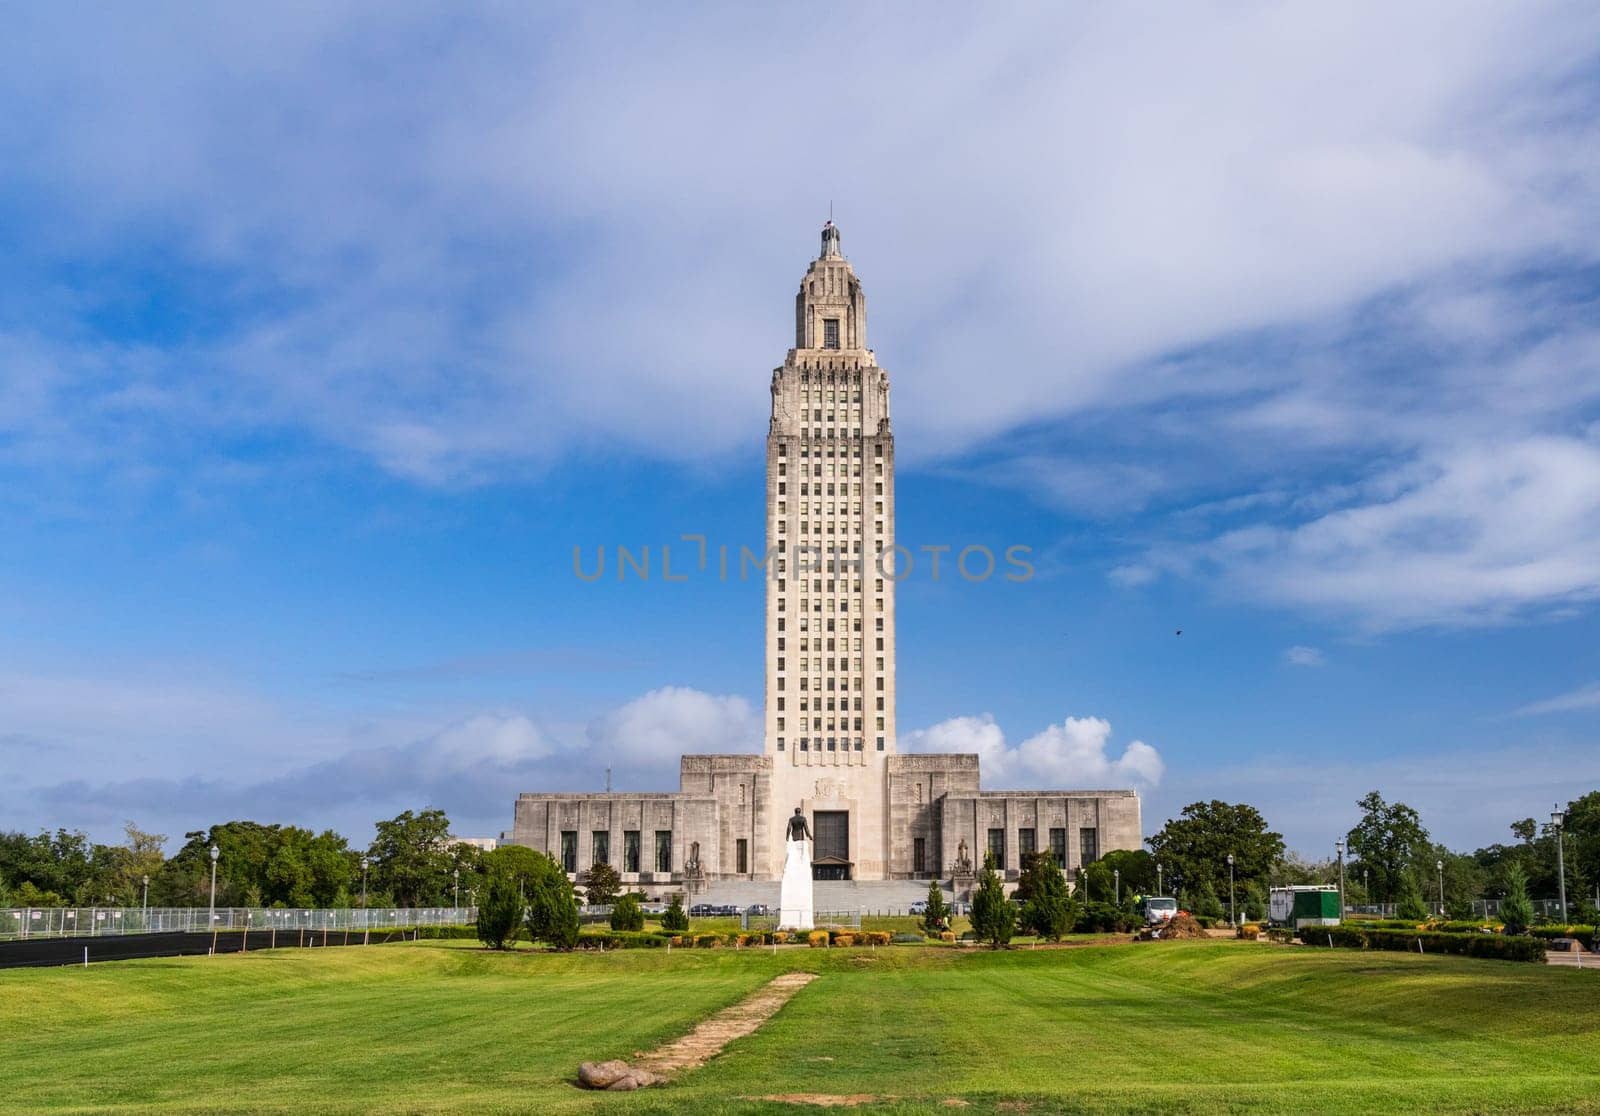 State Capitol building in Baton Rouge Louisiana by steheap